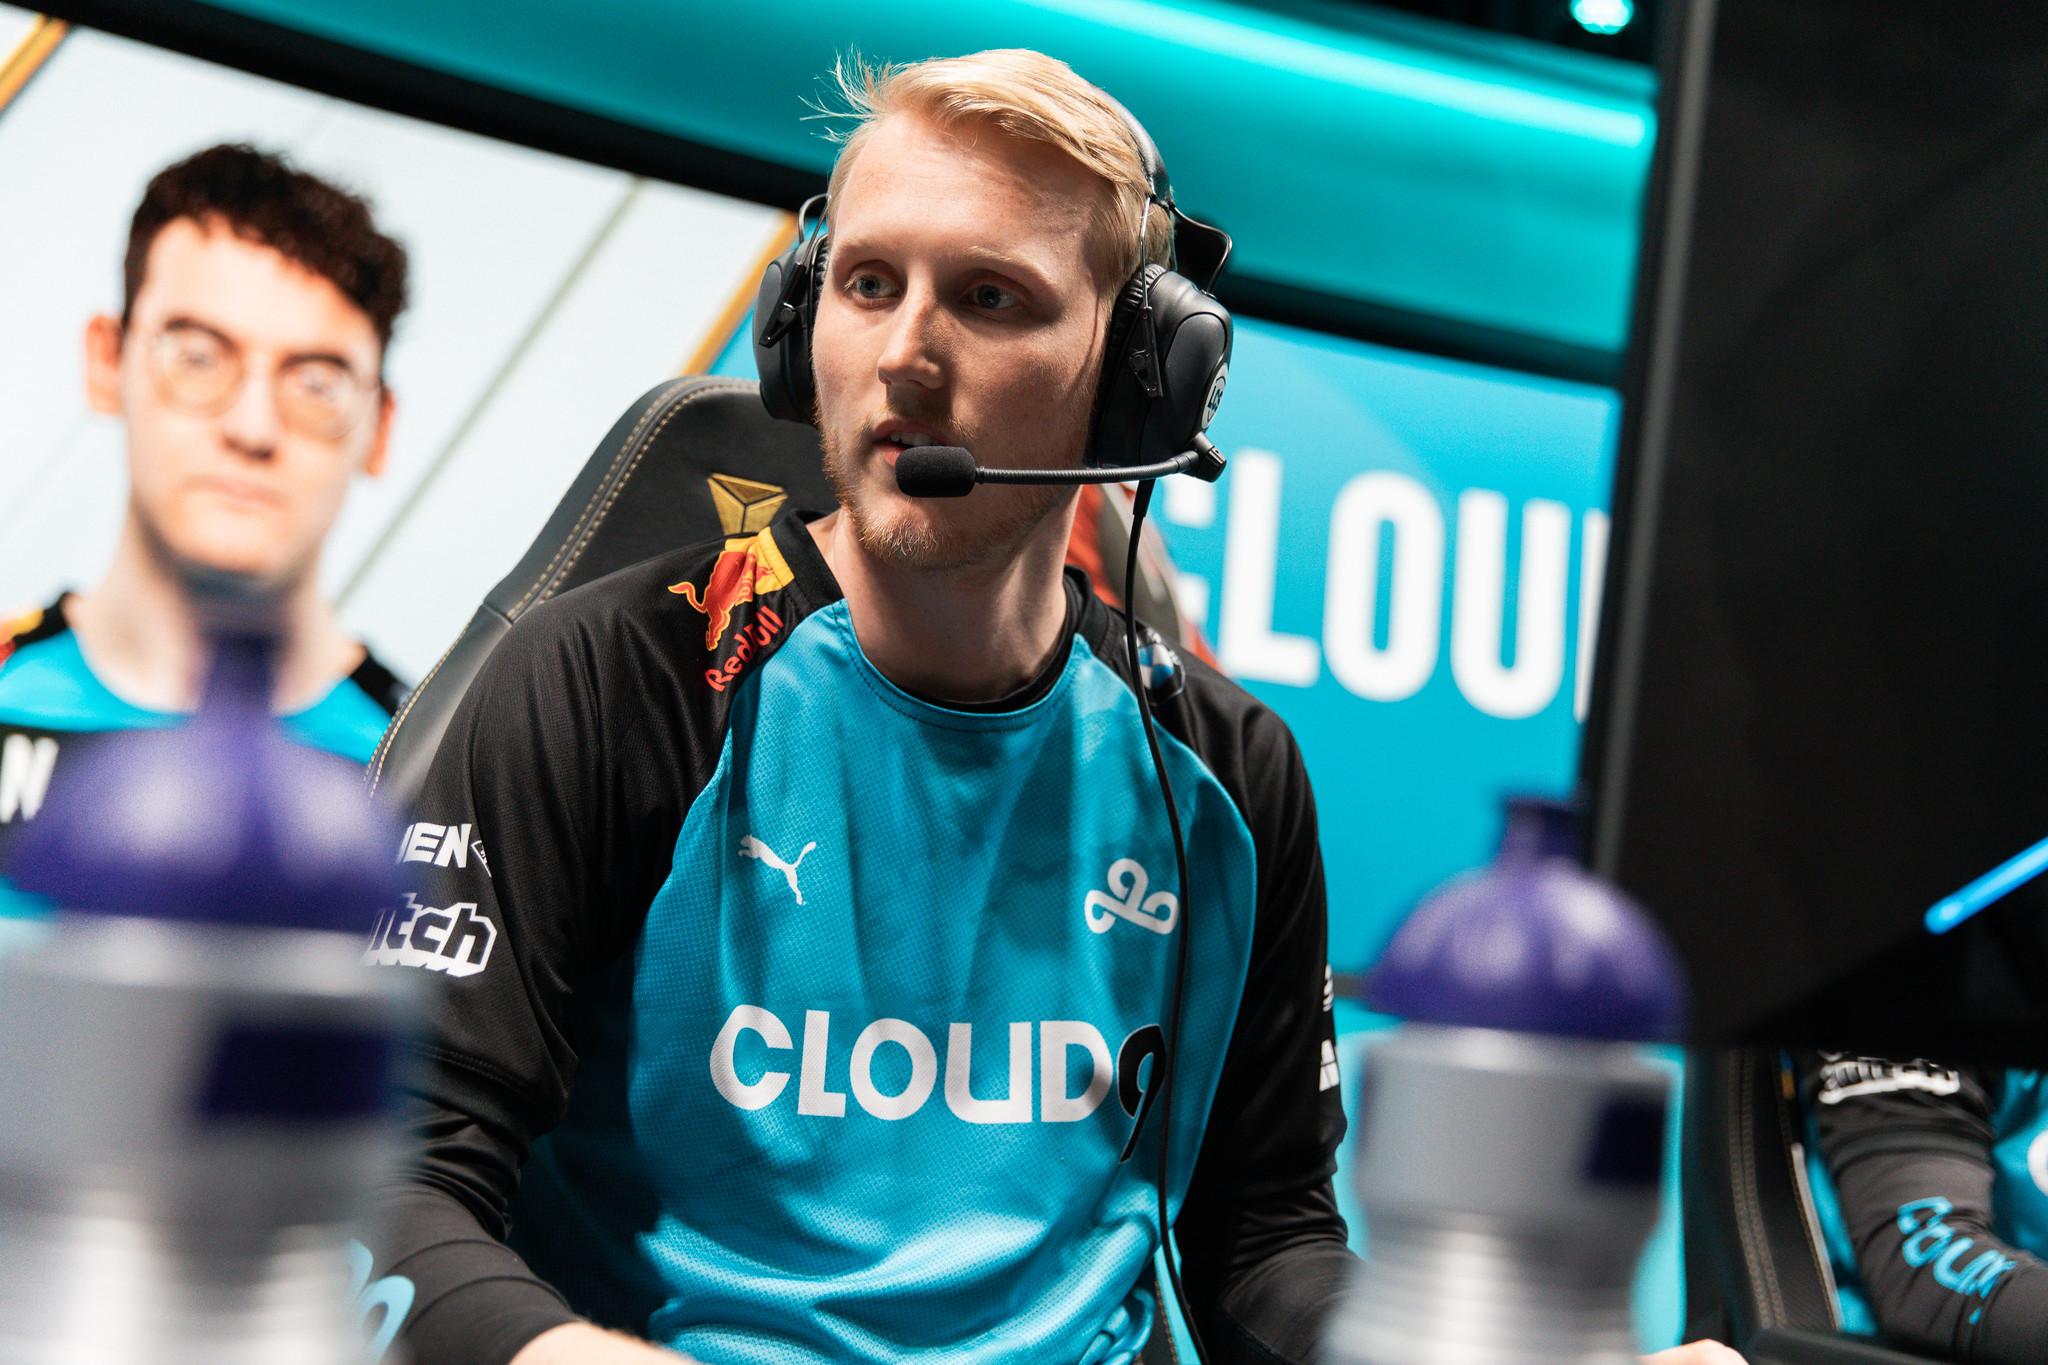 Zven has one an LCS title with Cloud9 since joining last year.